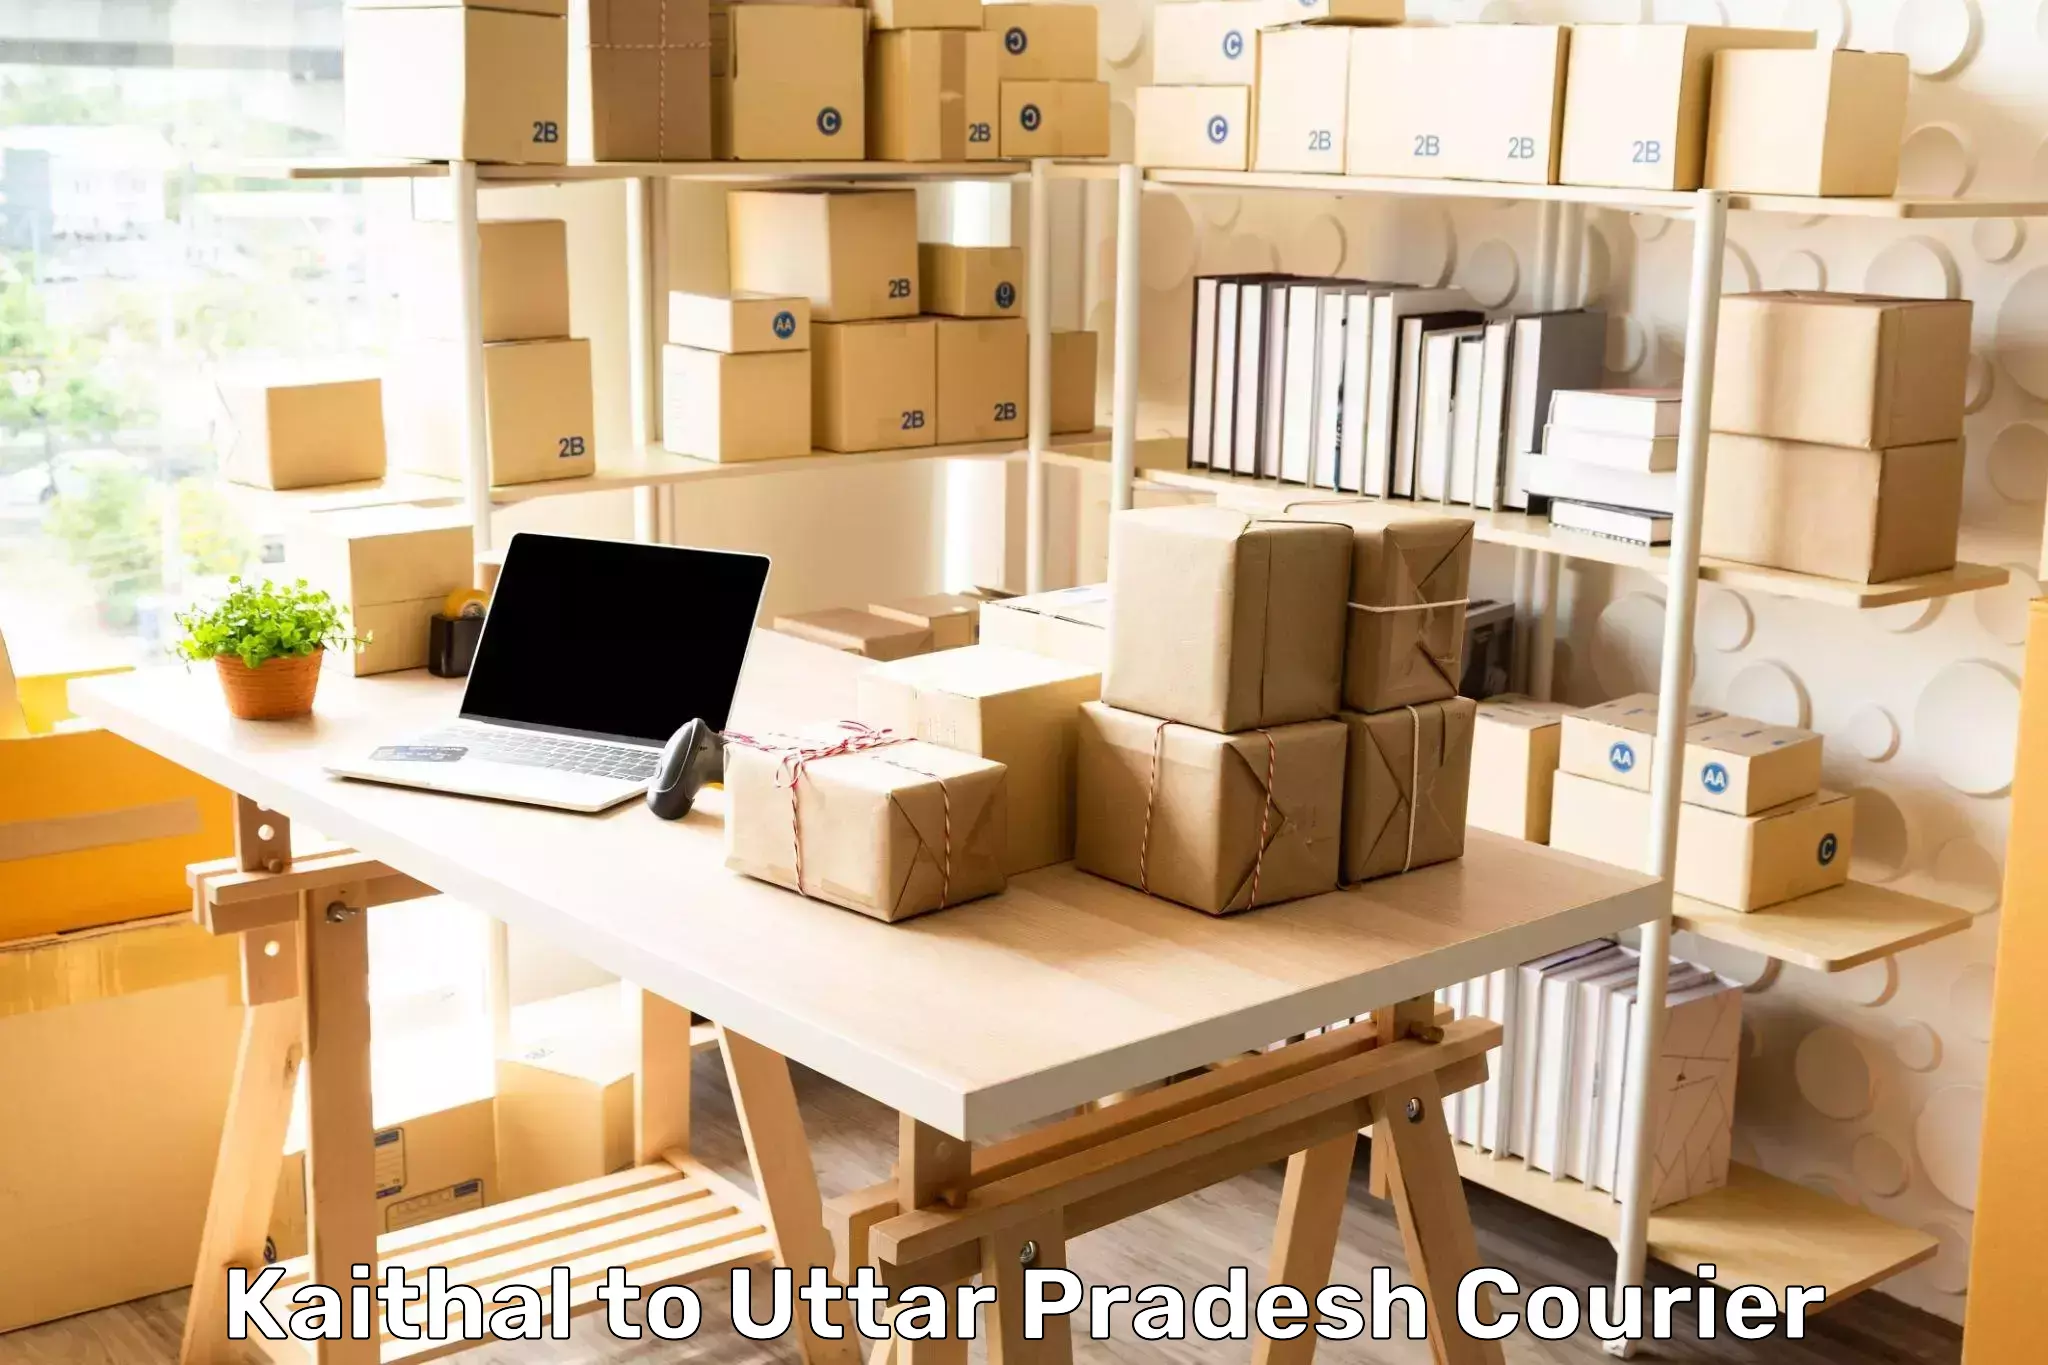 International courier rates Kaithal to Kanth